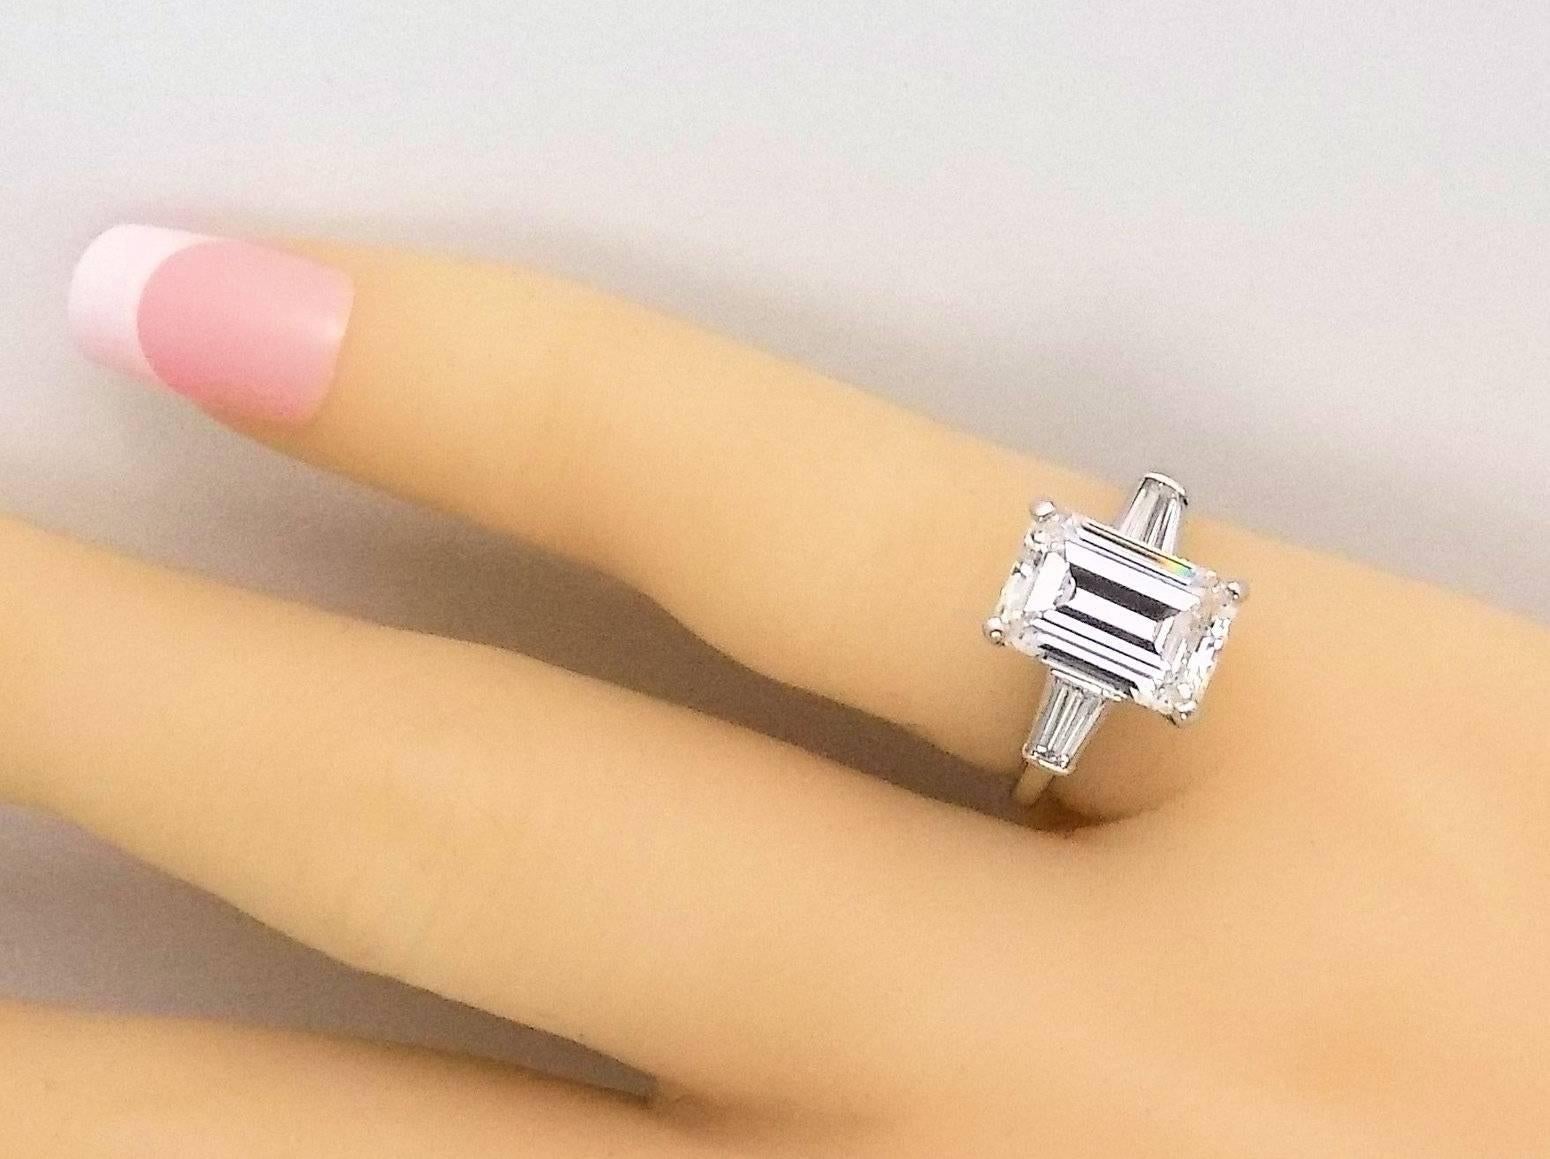 Classic 3.25 Carat Emerald Cut Diamond GIA Certified Engagement Ring For Sale 1